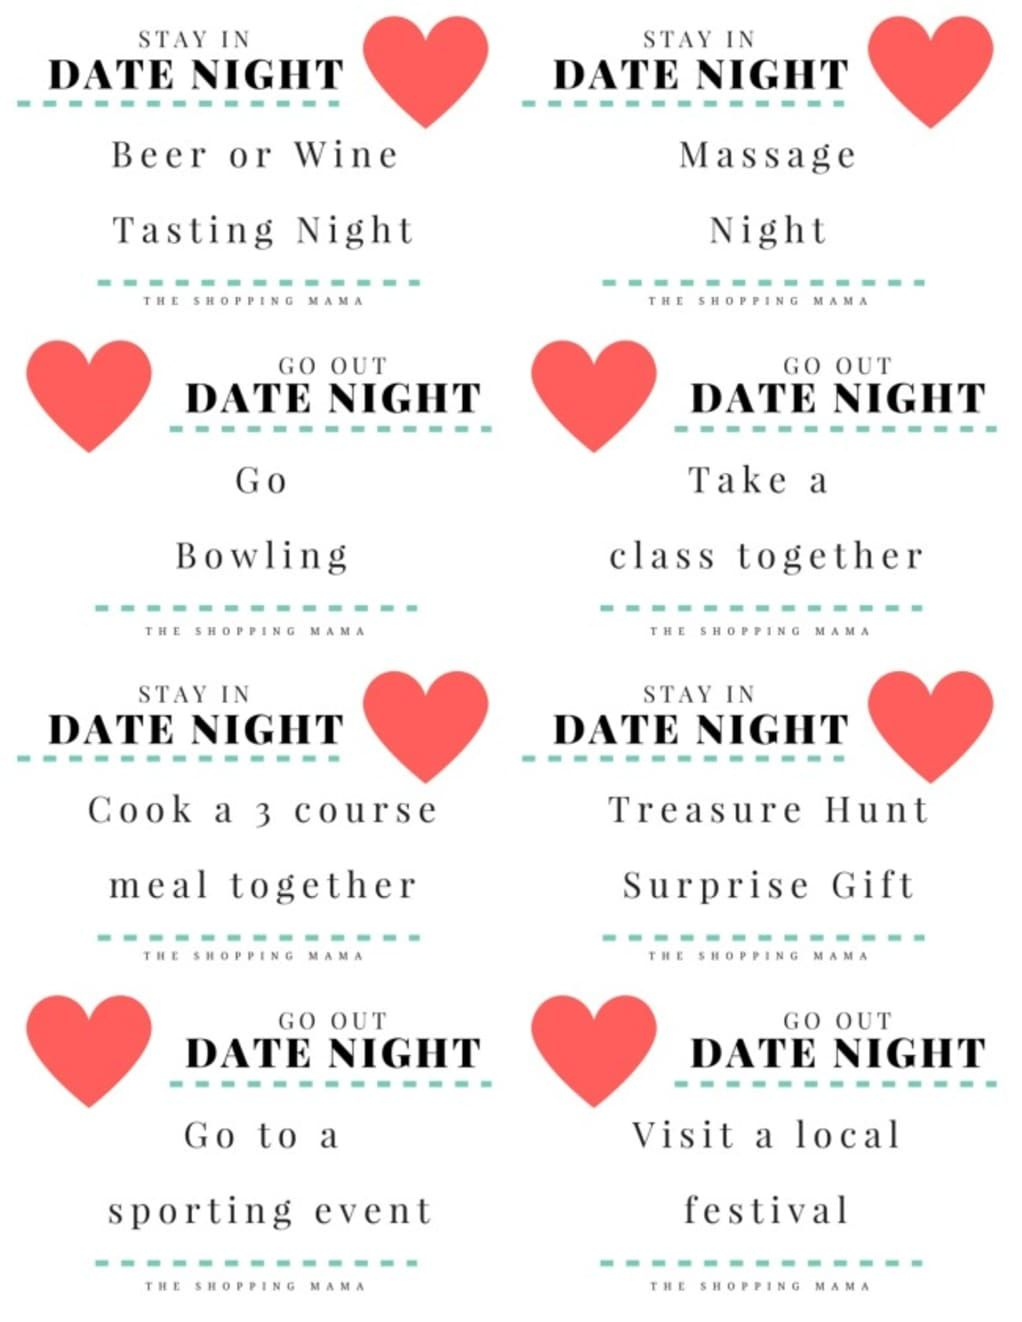 12 Months Of Date Night Ideas Free Printables Date Night Gifts Date